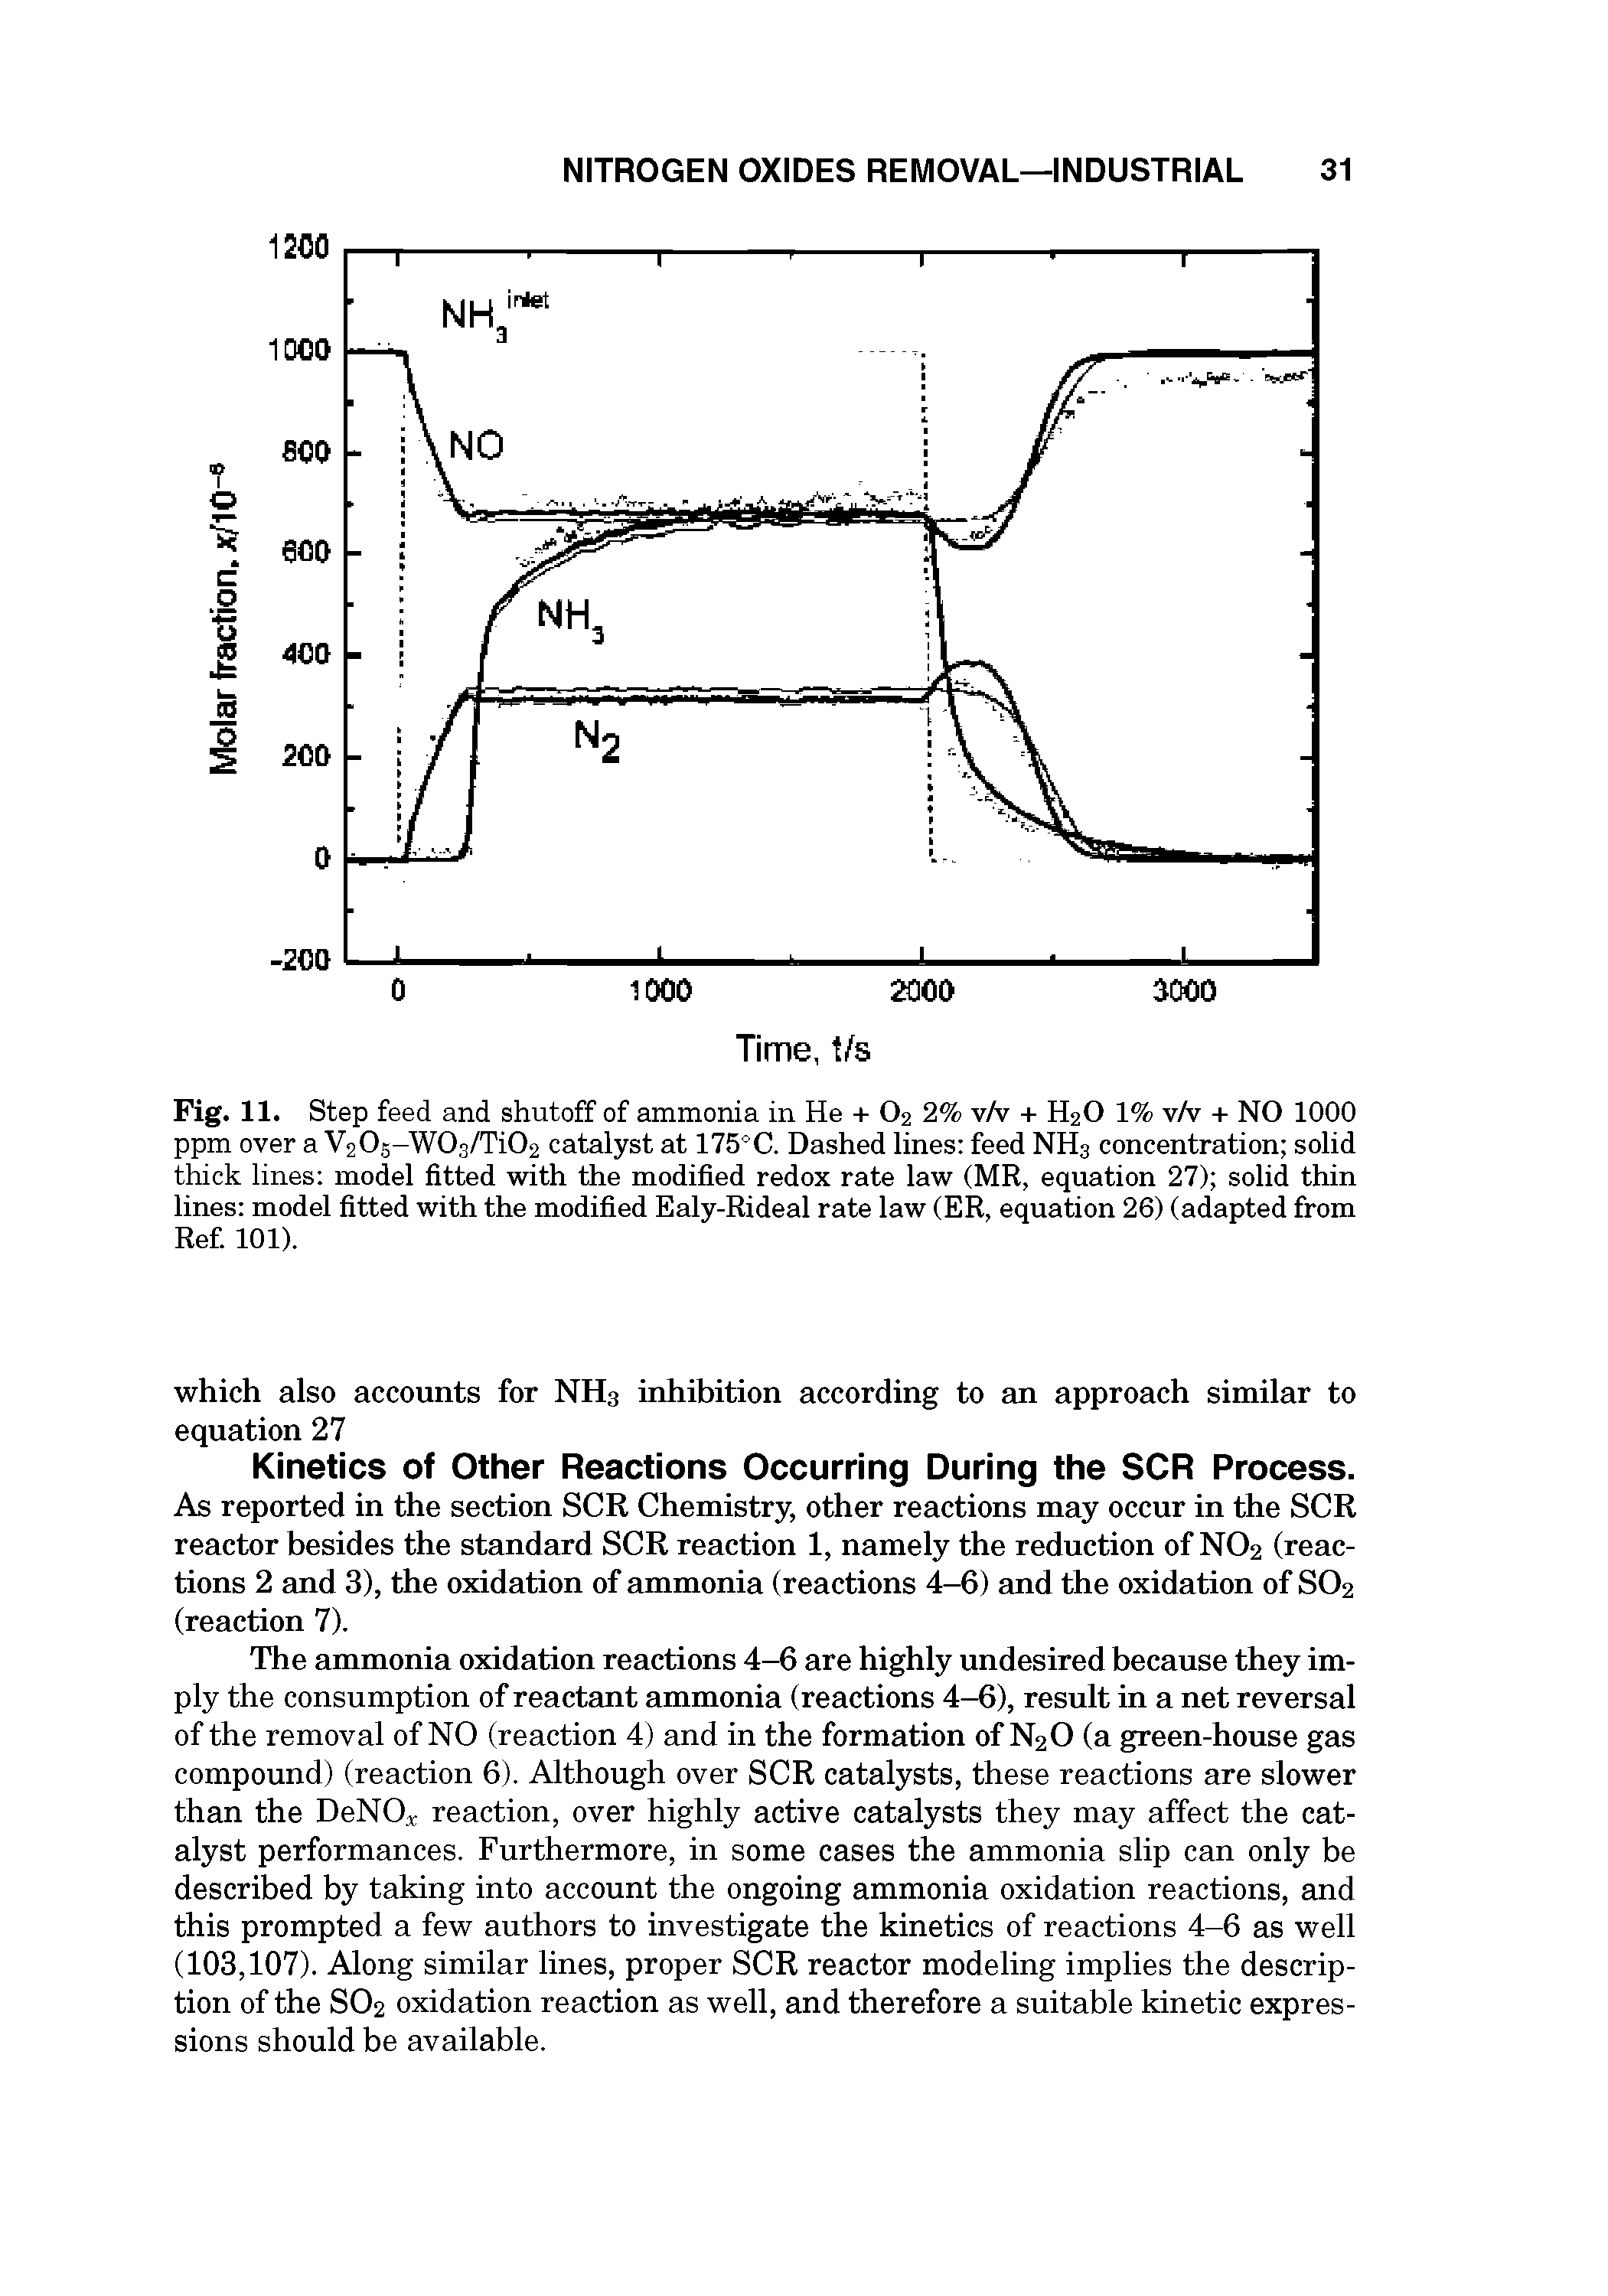 Fig. 11. Step feed and shutoff of ammonia in He + O2 2% vN + H2O 1% v/v + NO 1000 ppm over a V205-W0s/Ti02 catalyst at 175°C. Dashed lines feed NH3 concentration solid thick lines model fitted with the modified redox rate law (MR, equation 27) solid thin lines model fitted with the modified Ealy-Rideal rate law (ER, equation 26) (adapted from Ref. 101).